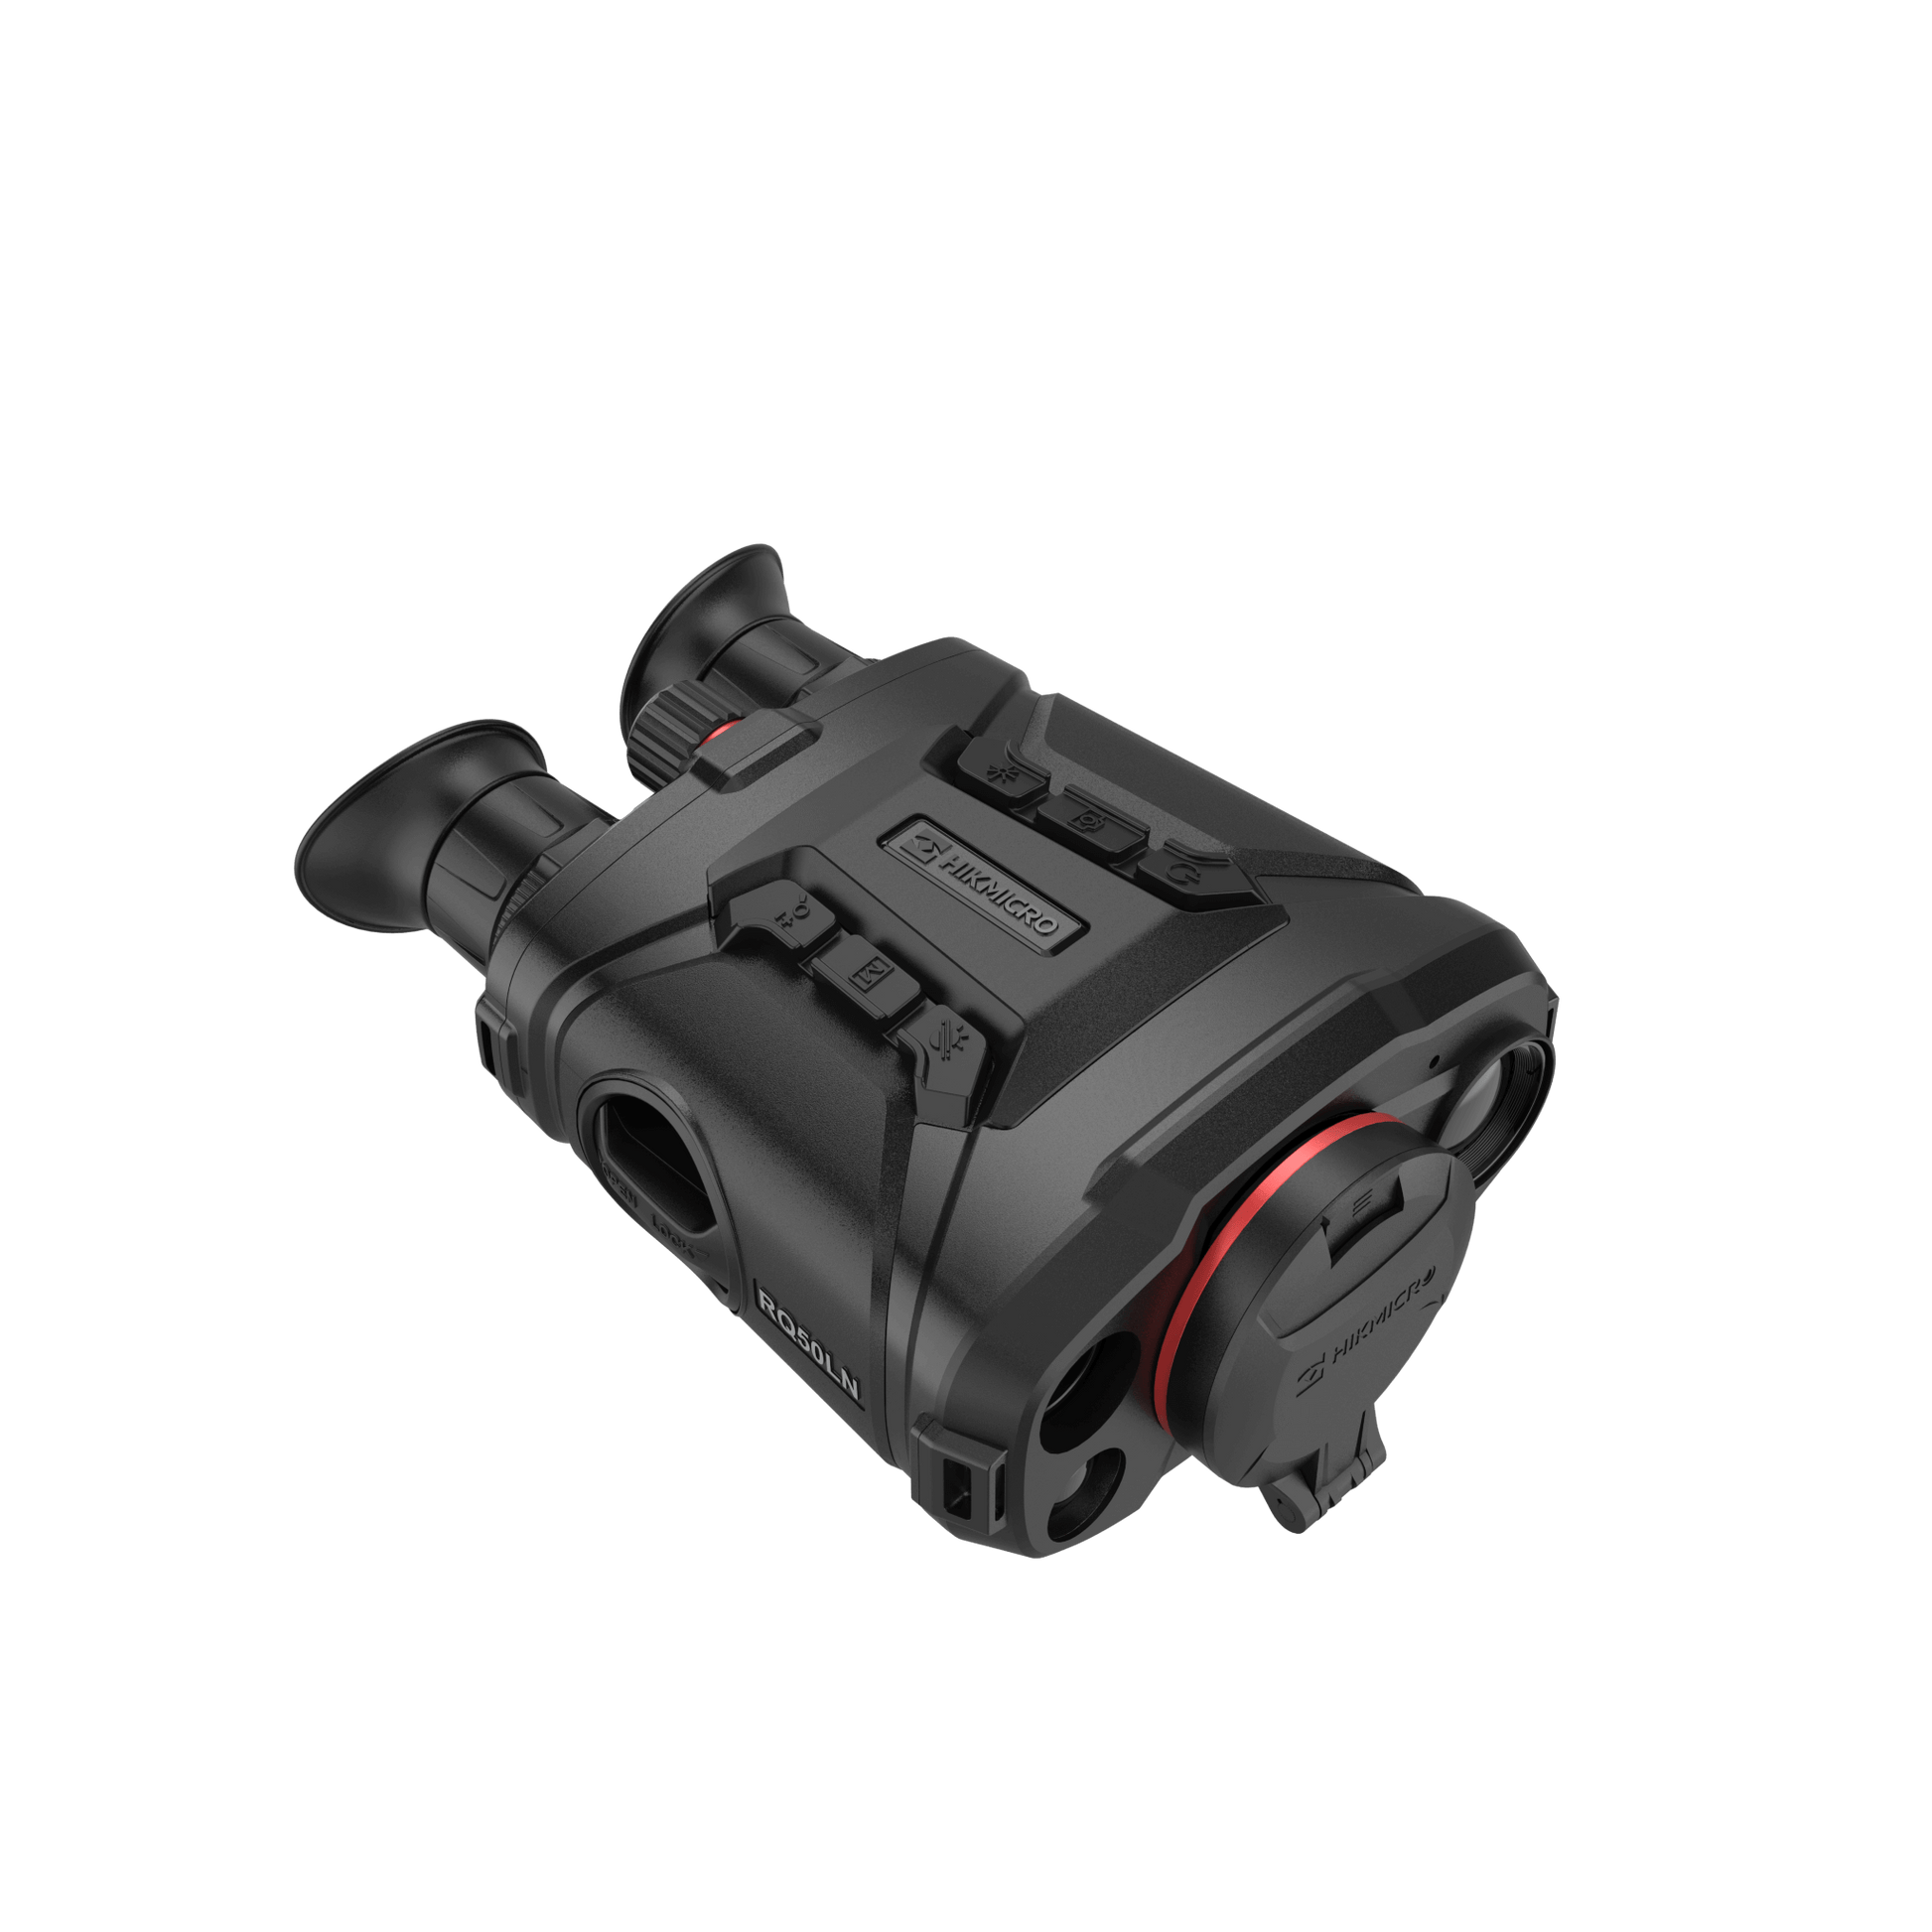 HikMicro Raptor RH50 handheld thermal binocular with infrared and optical capabilities - Front Right View